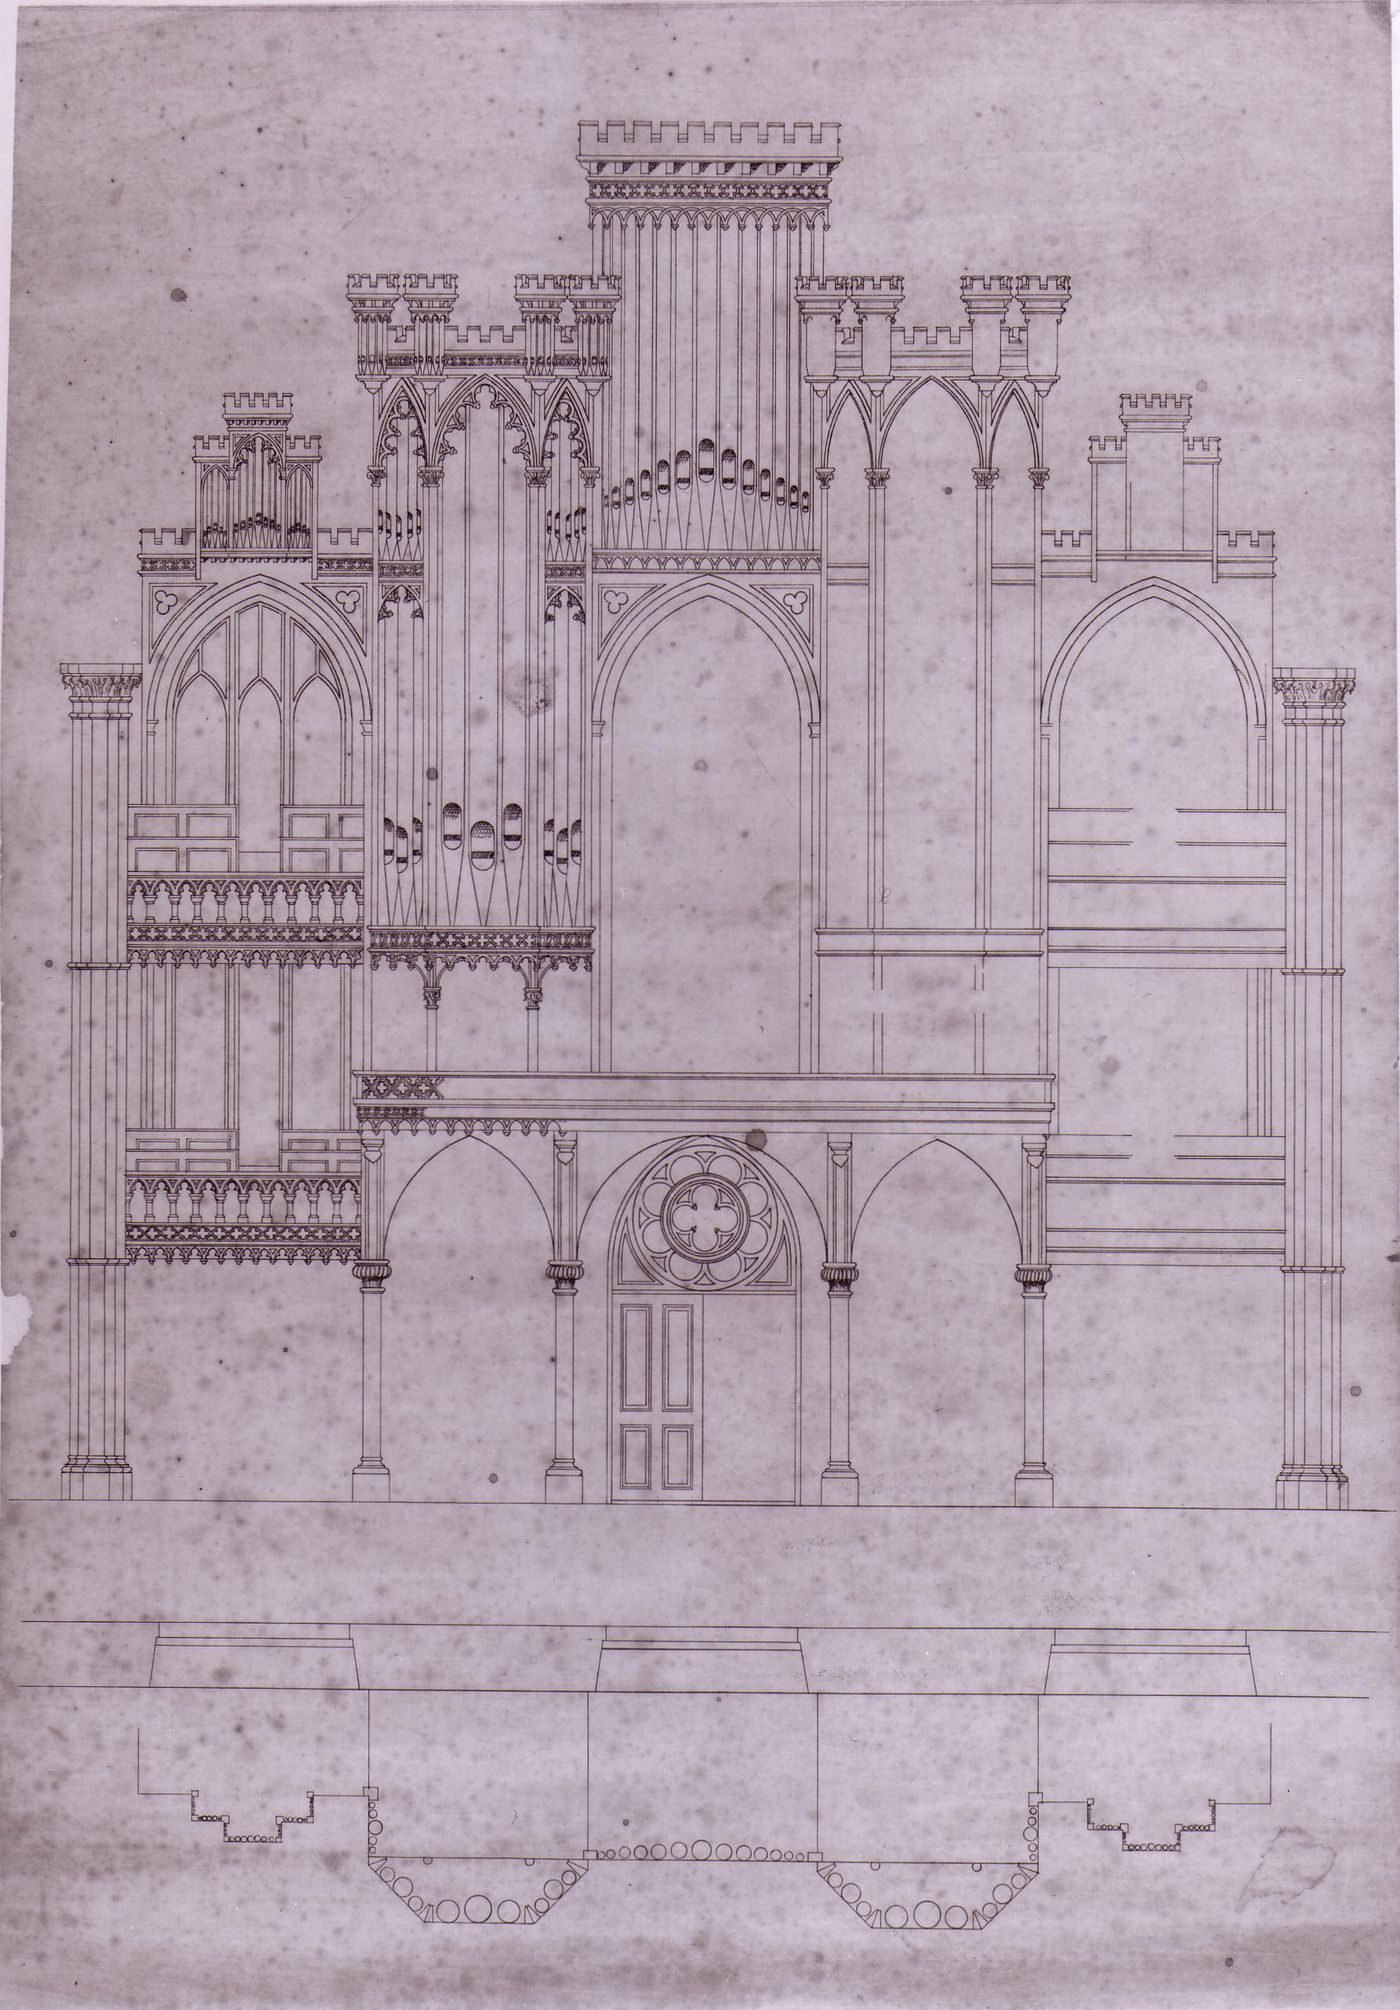 Plan and elevation for the organ for the interior design by Bourgeau et Leprohon for Notre-Dame de Montréal